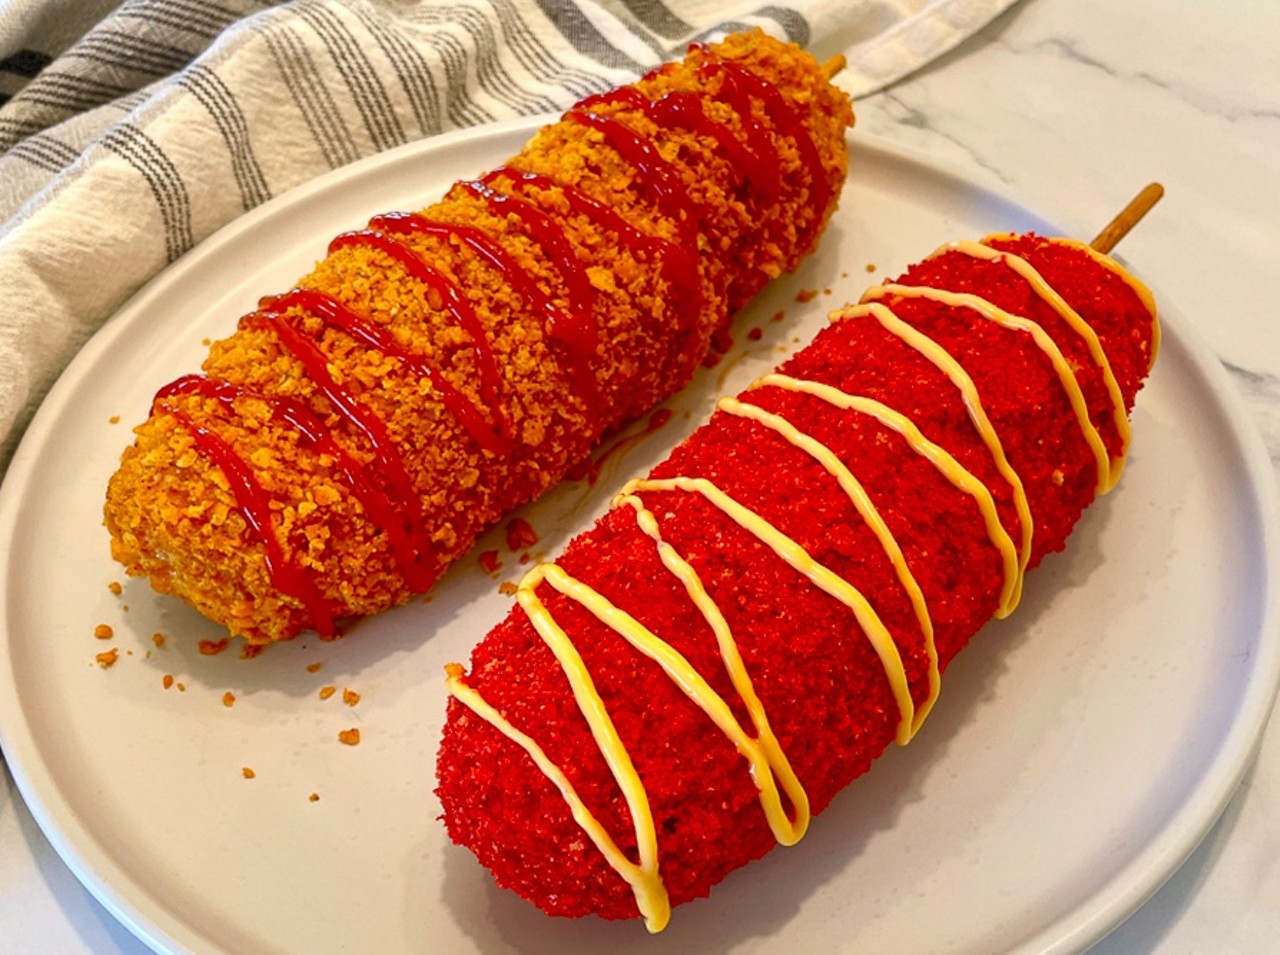 Spicy Korean Corndog
Hot dog dipped in buttermilk batter, layered with cheese, and rolled in crushed spicy hot Cheetos.
Location: Seivers Smokehouse Grill